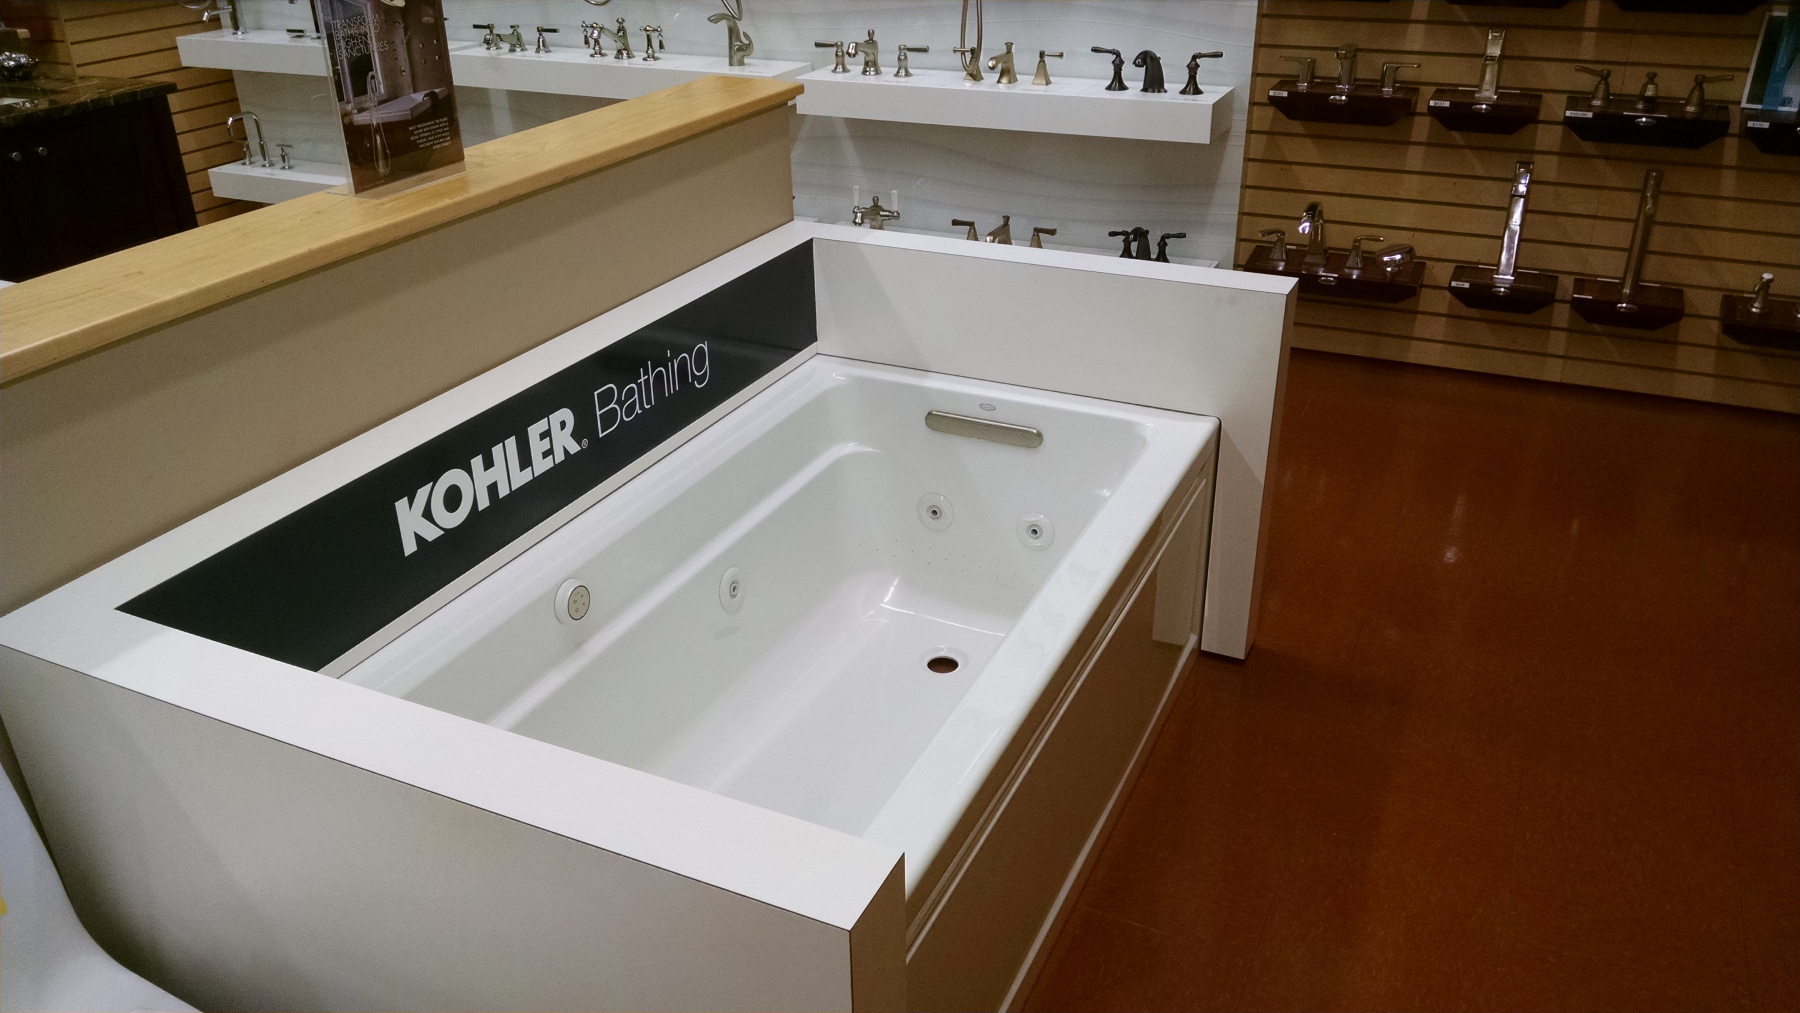 Nationwide Fixture Installations Inc Kohler Case Study New Store Installation Retail Rollouts Shop-in-Shop Program Management Signage